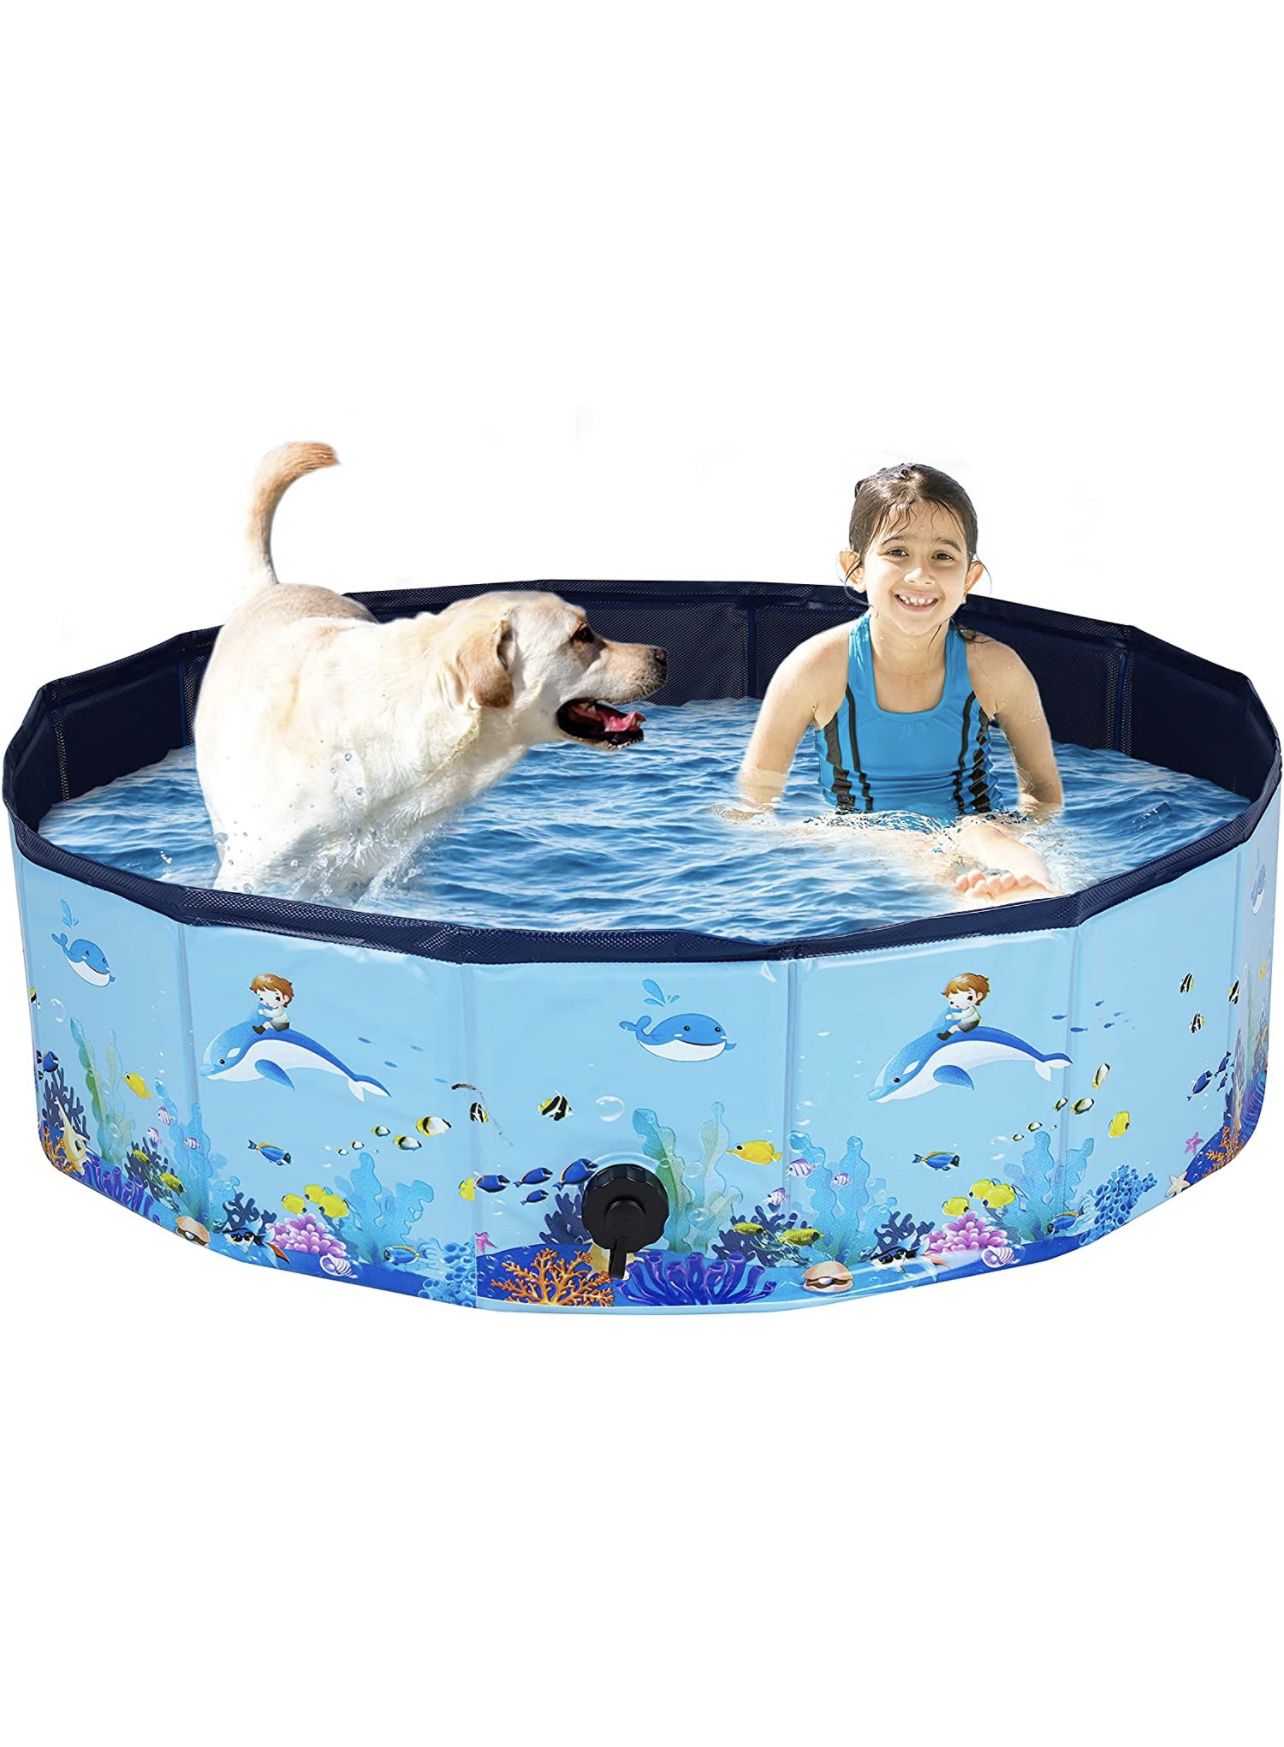 WEISIP Foldable Pet Dog Pool,Outdoor Portable Plastic Pet Dog Bath Tub Kids Swimming Pool for Dogs Cats and kiddies